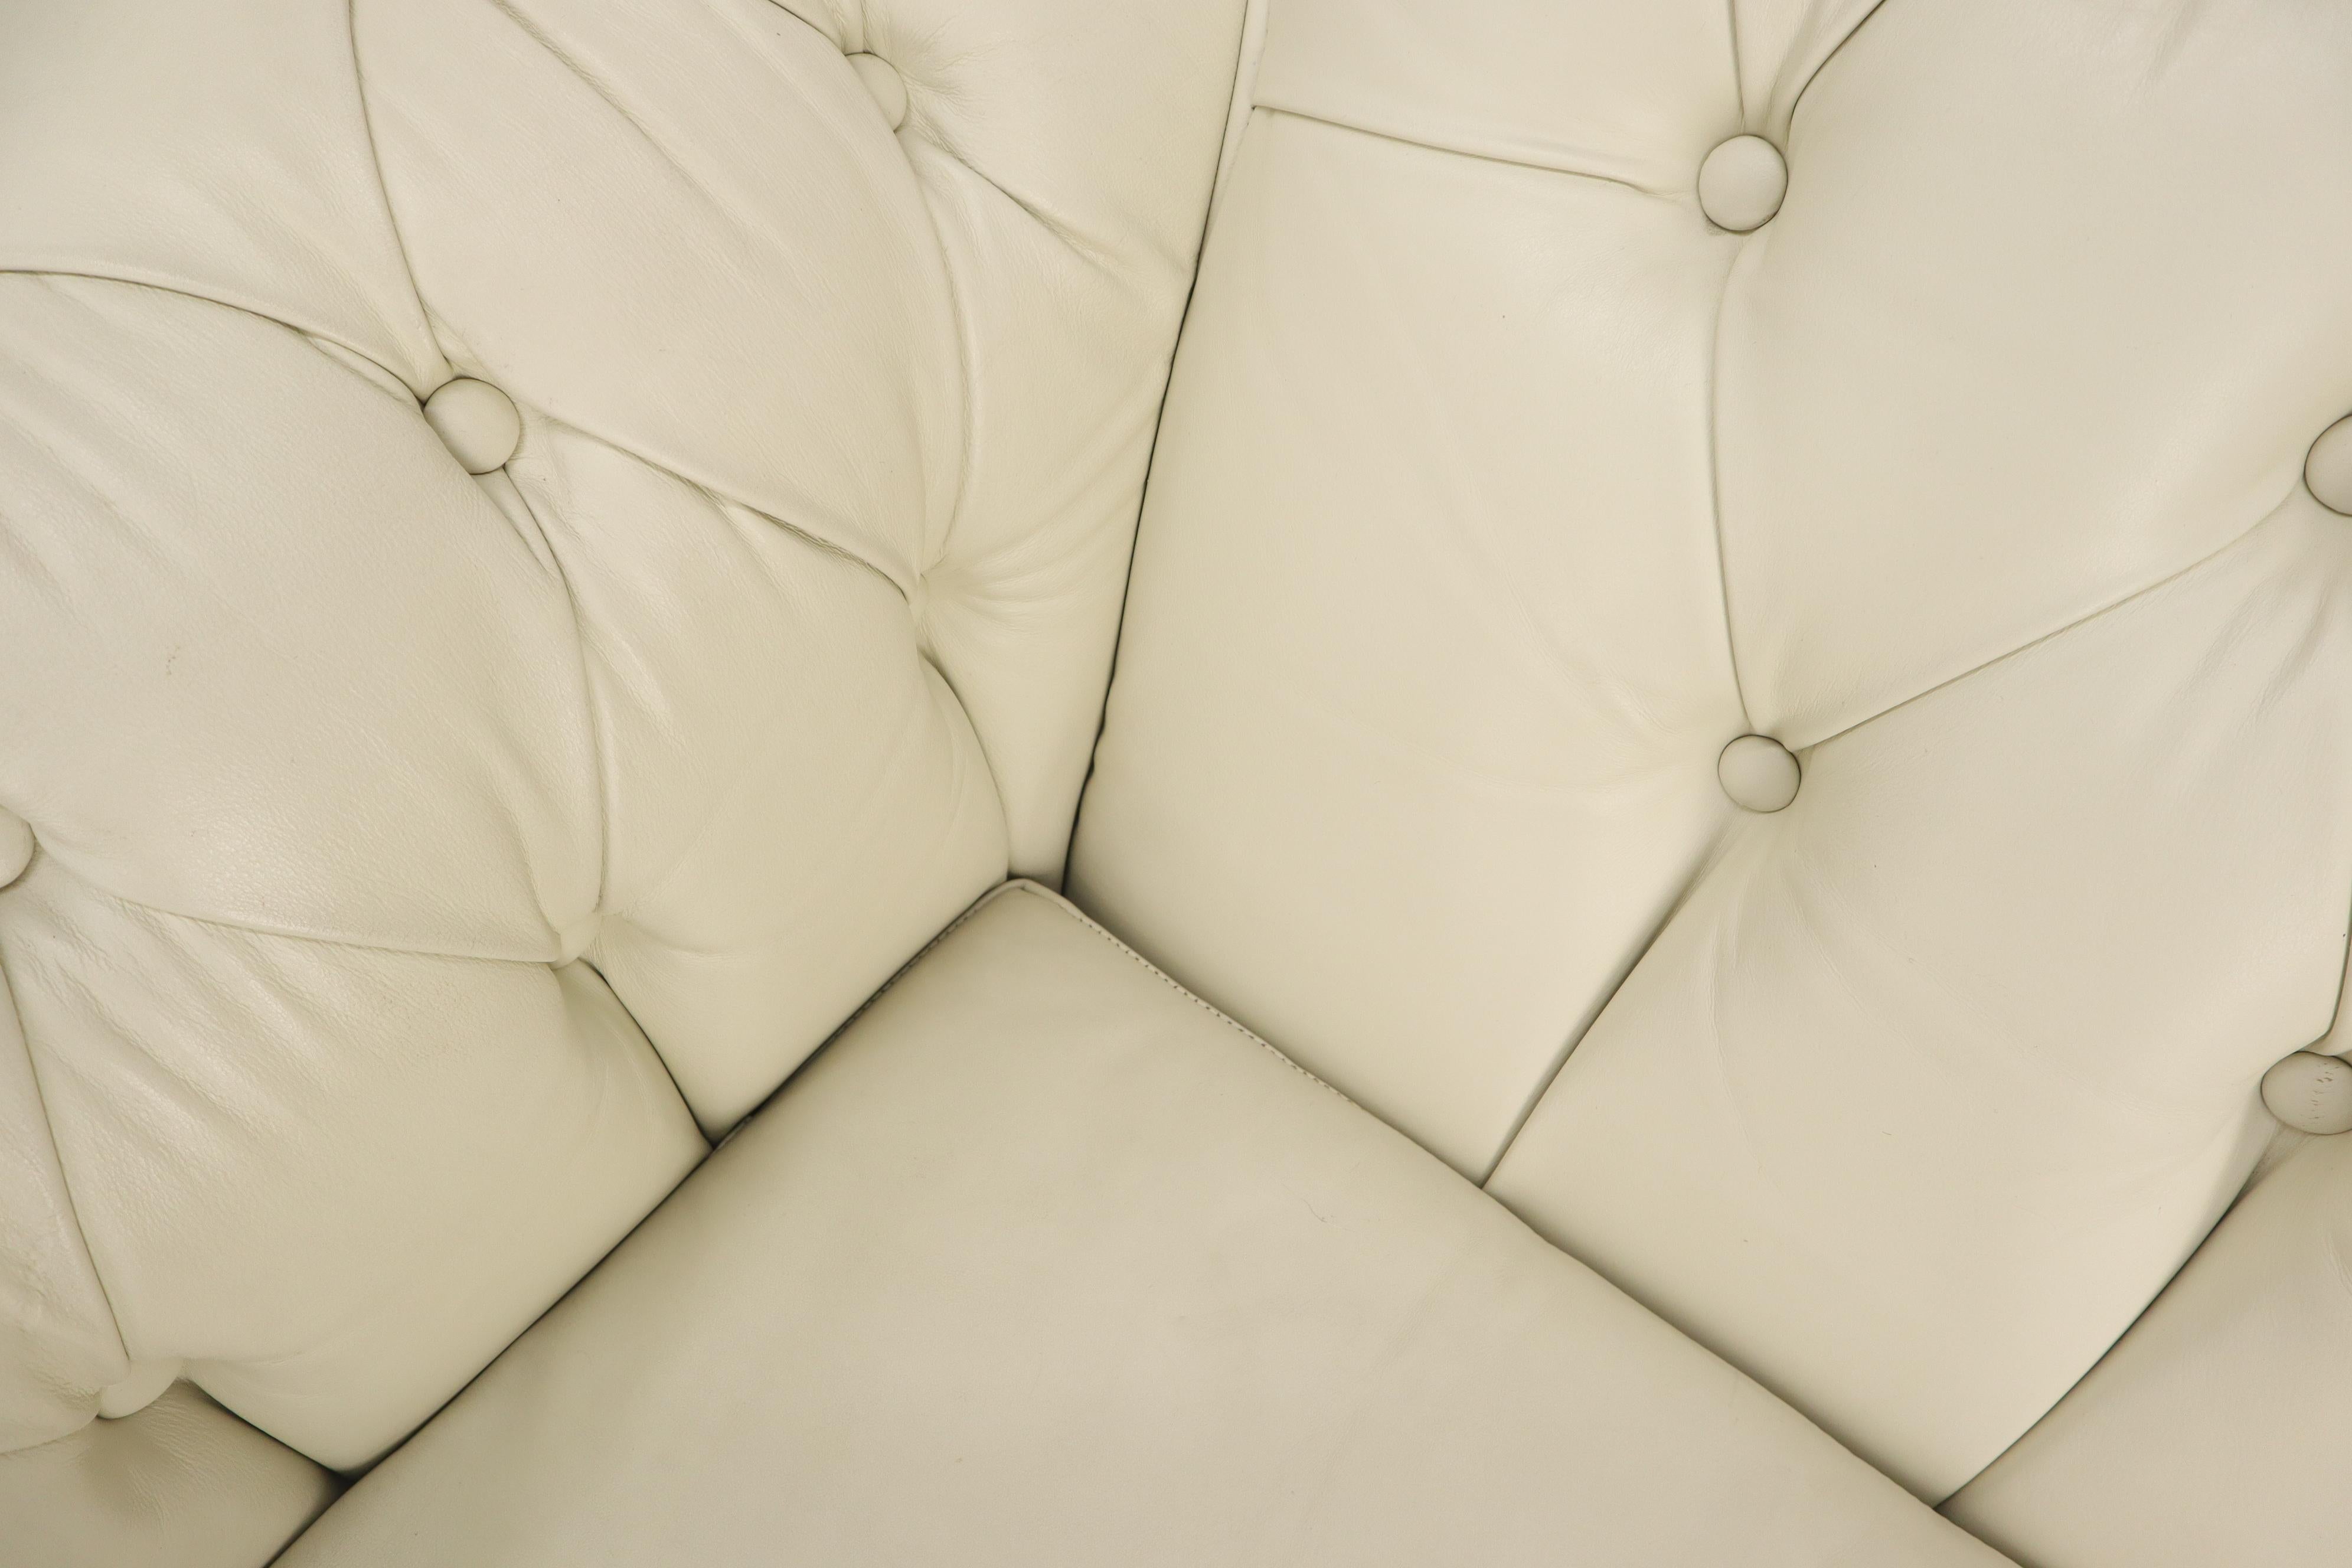 20th Century Pair of Off-White Leather Upholstery Tufted Chesterfield Sofas Couches